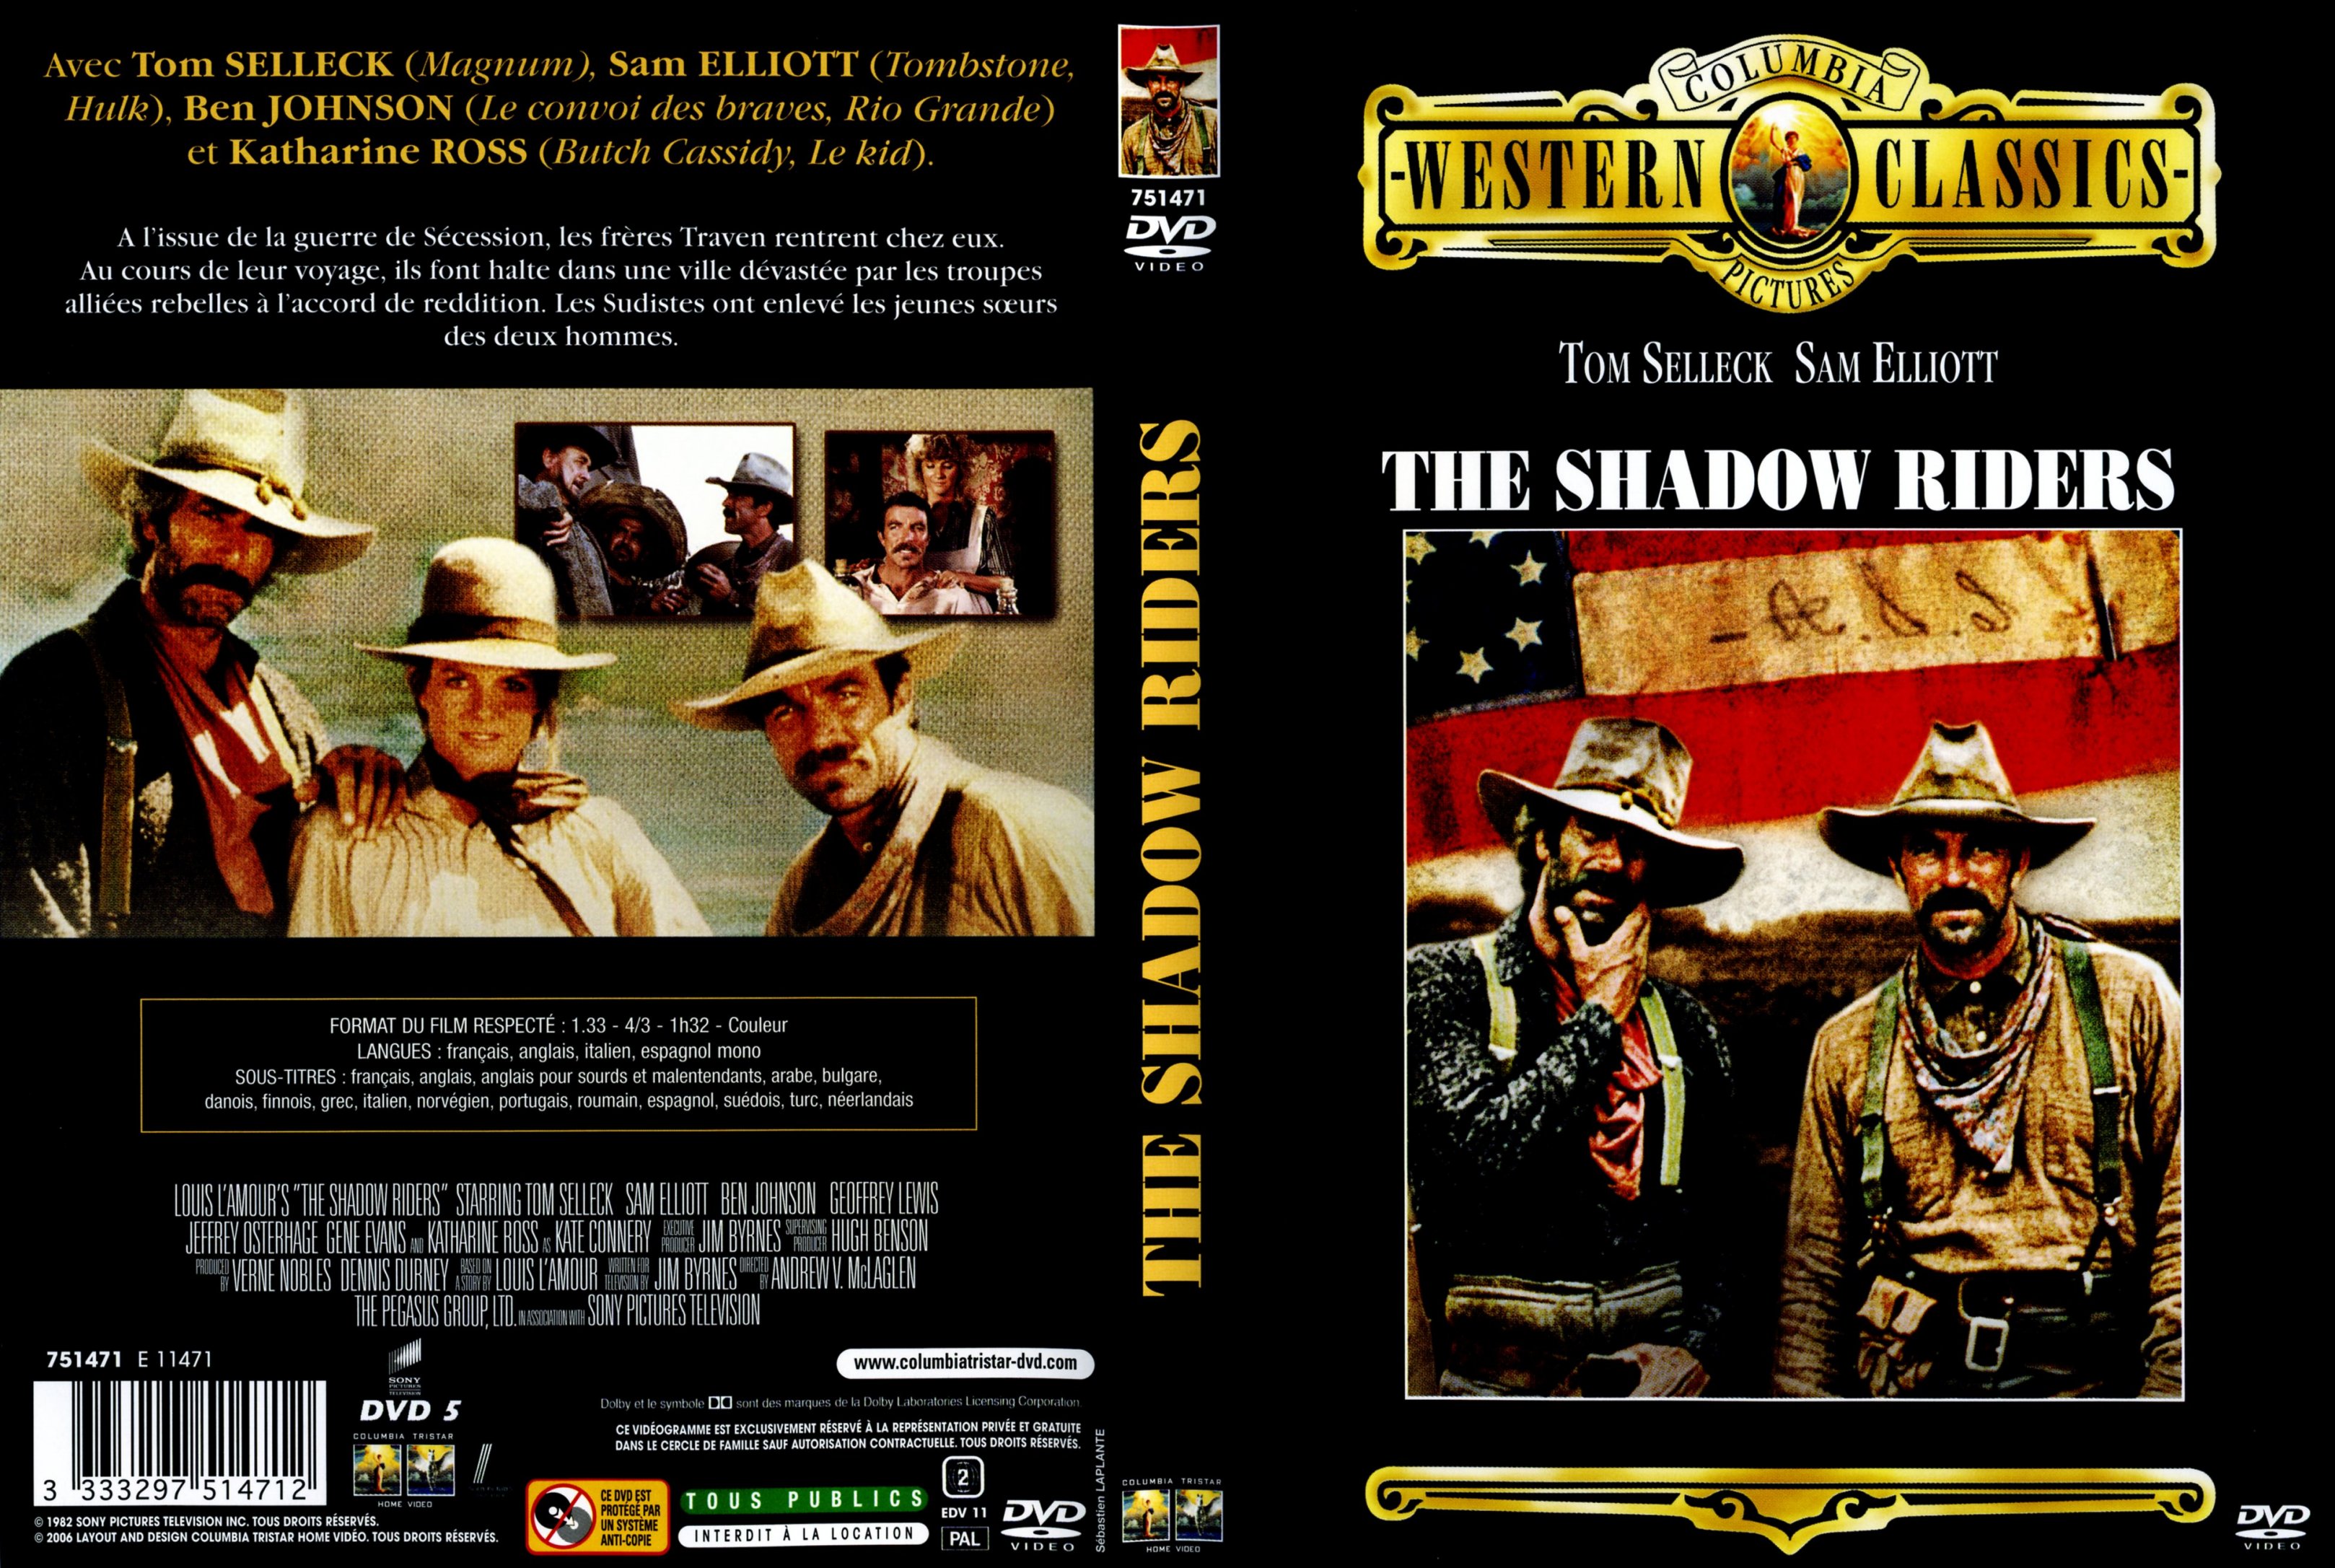 Jaquette DVD The shadow riders